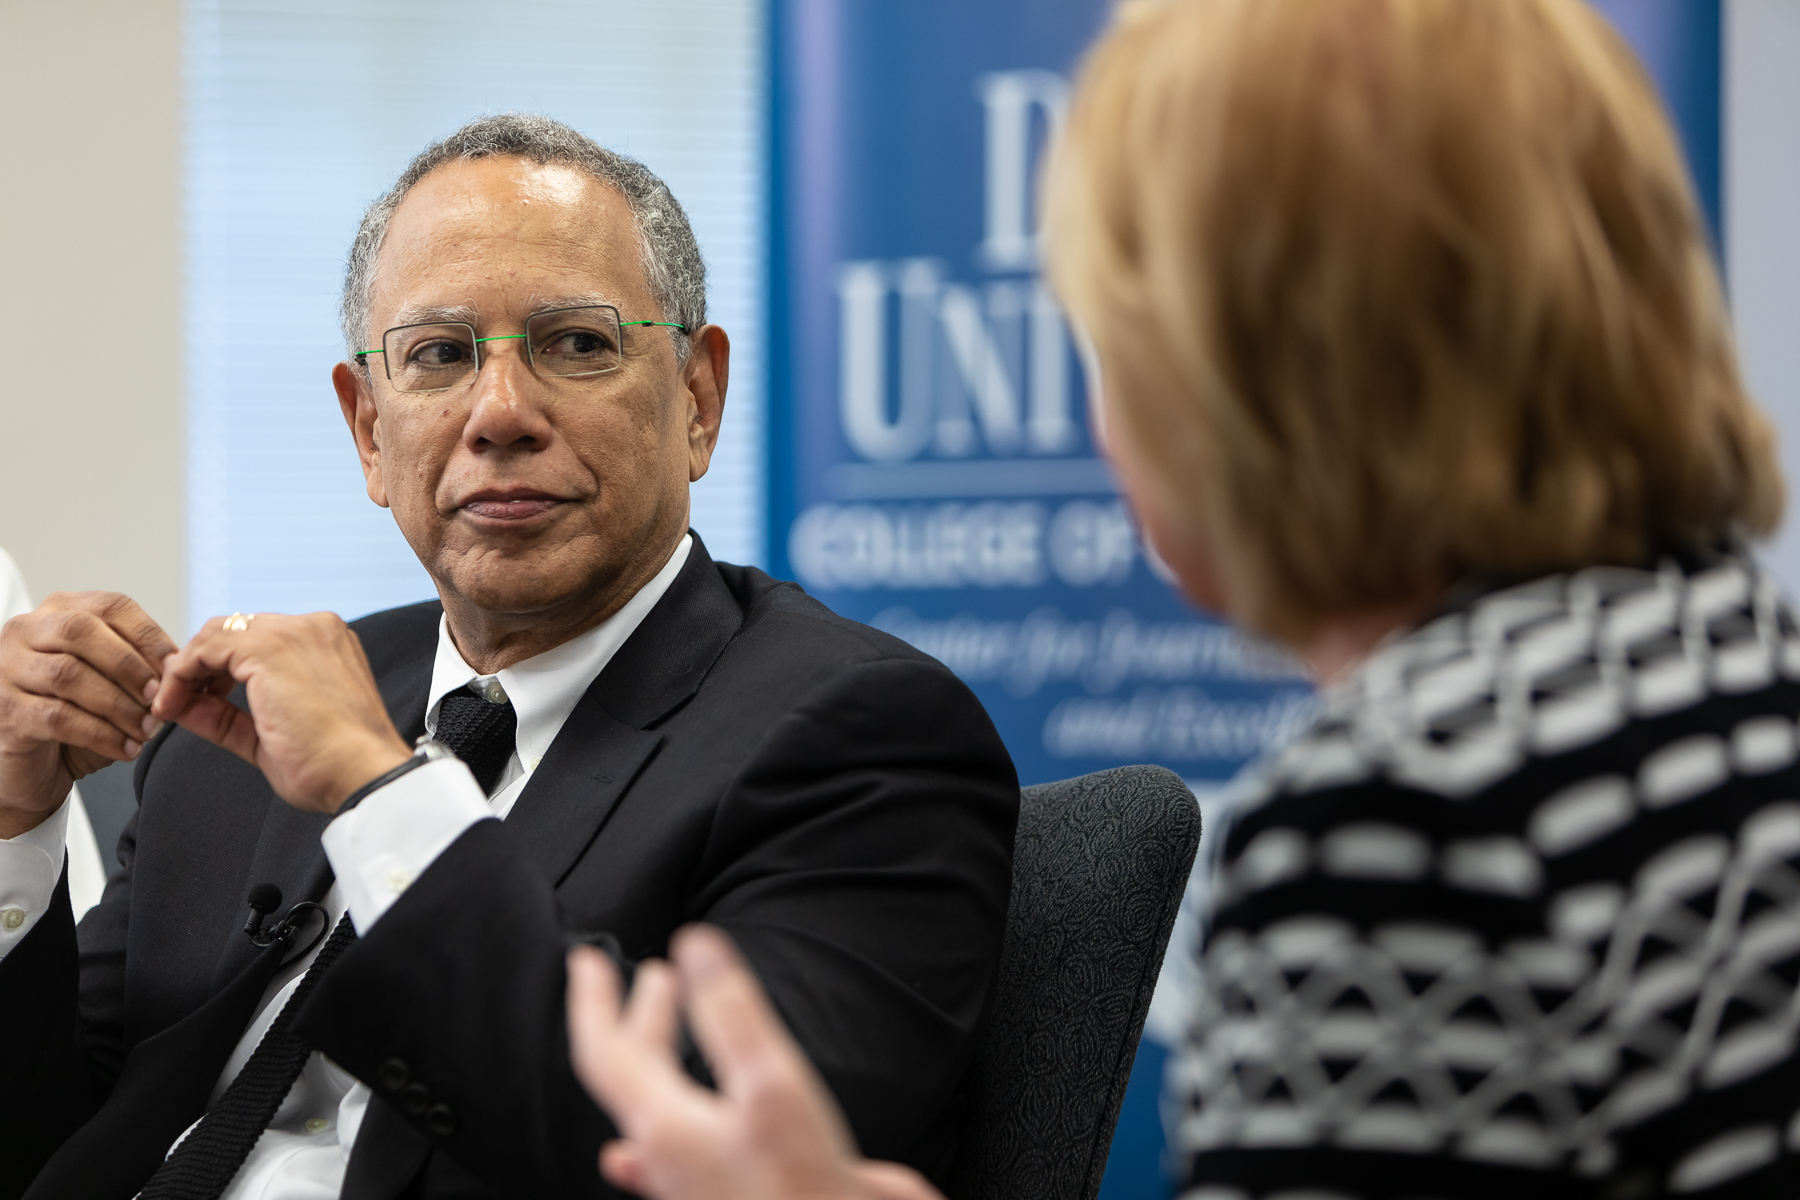 Dean Baquet, executive editor of the The New York Times, talks with Carol Marin, co-director of the Center for Journalism Integrity and Excellence, and College of Communication journalism students on Thursday, April 25. (DePaul University/Jeff Carrion)